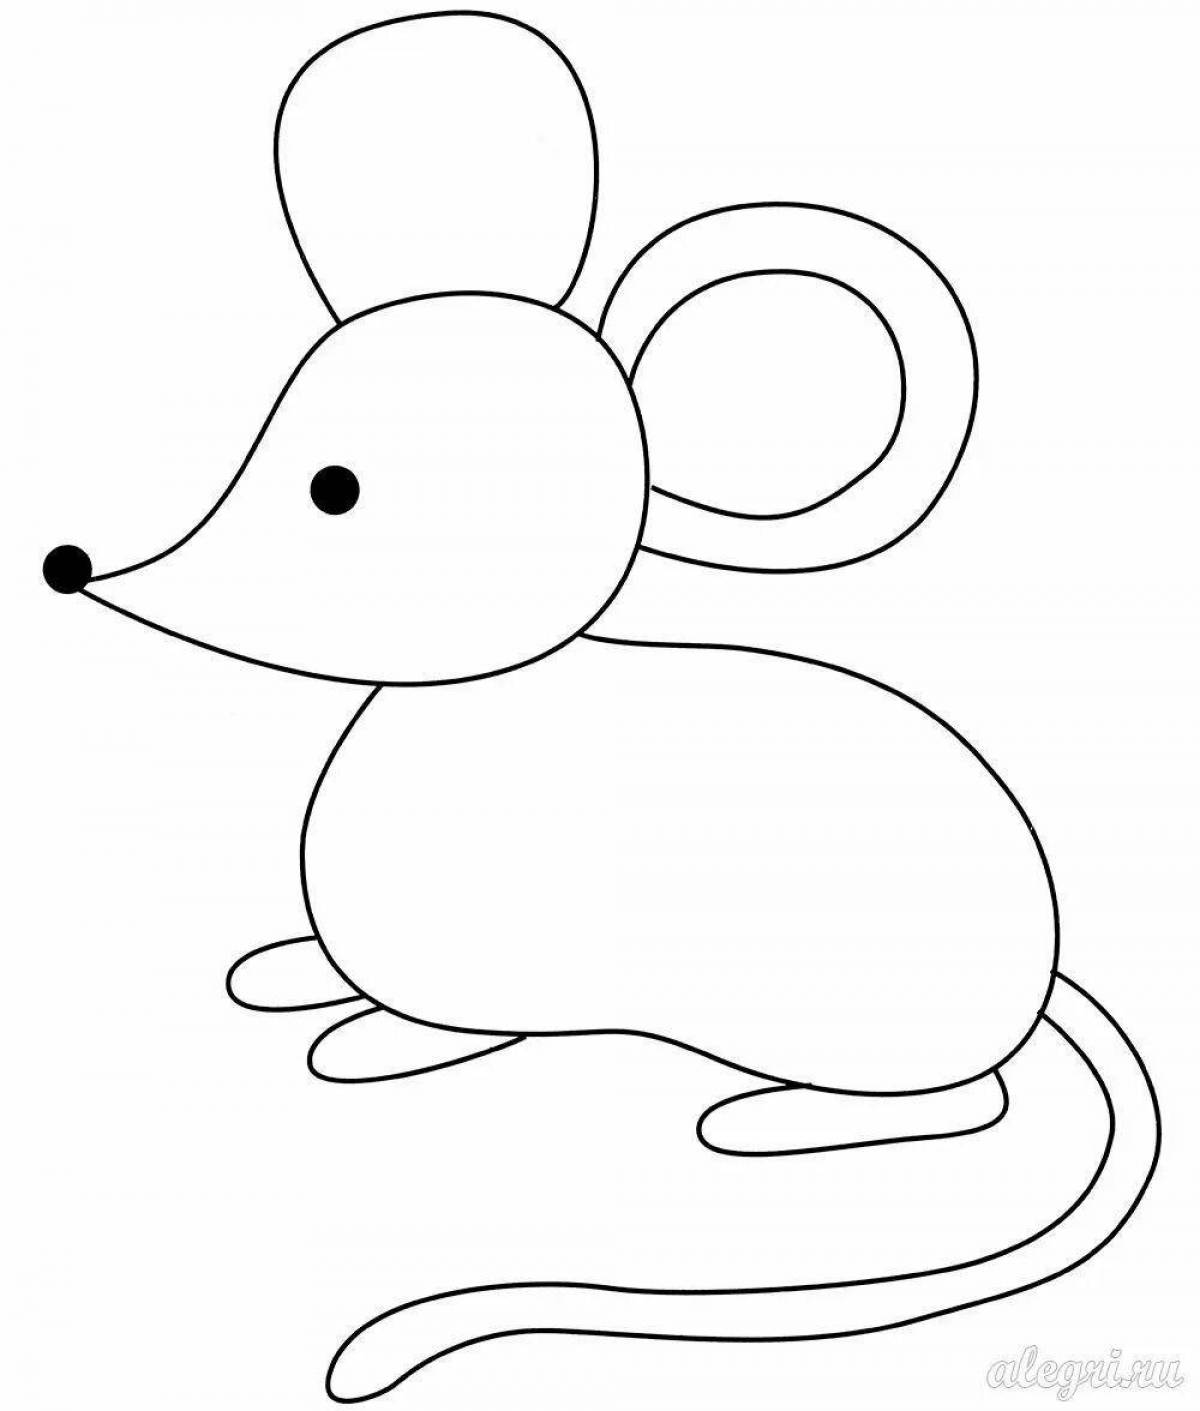 Playful coloring mouse for children 3-4 years old